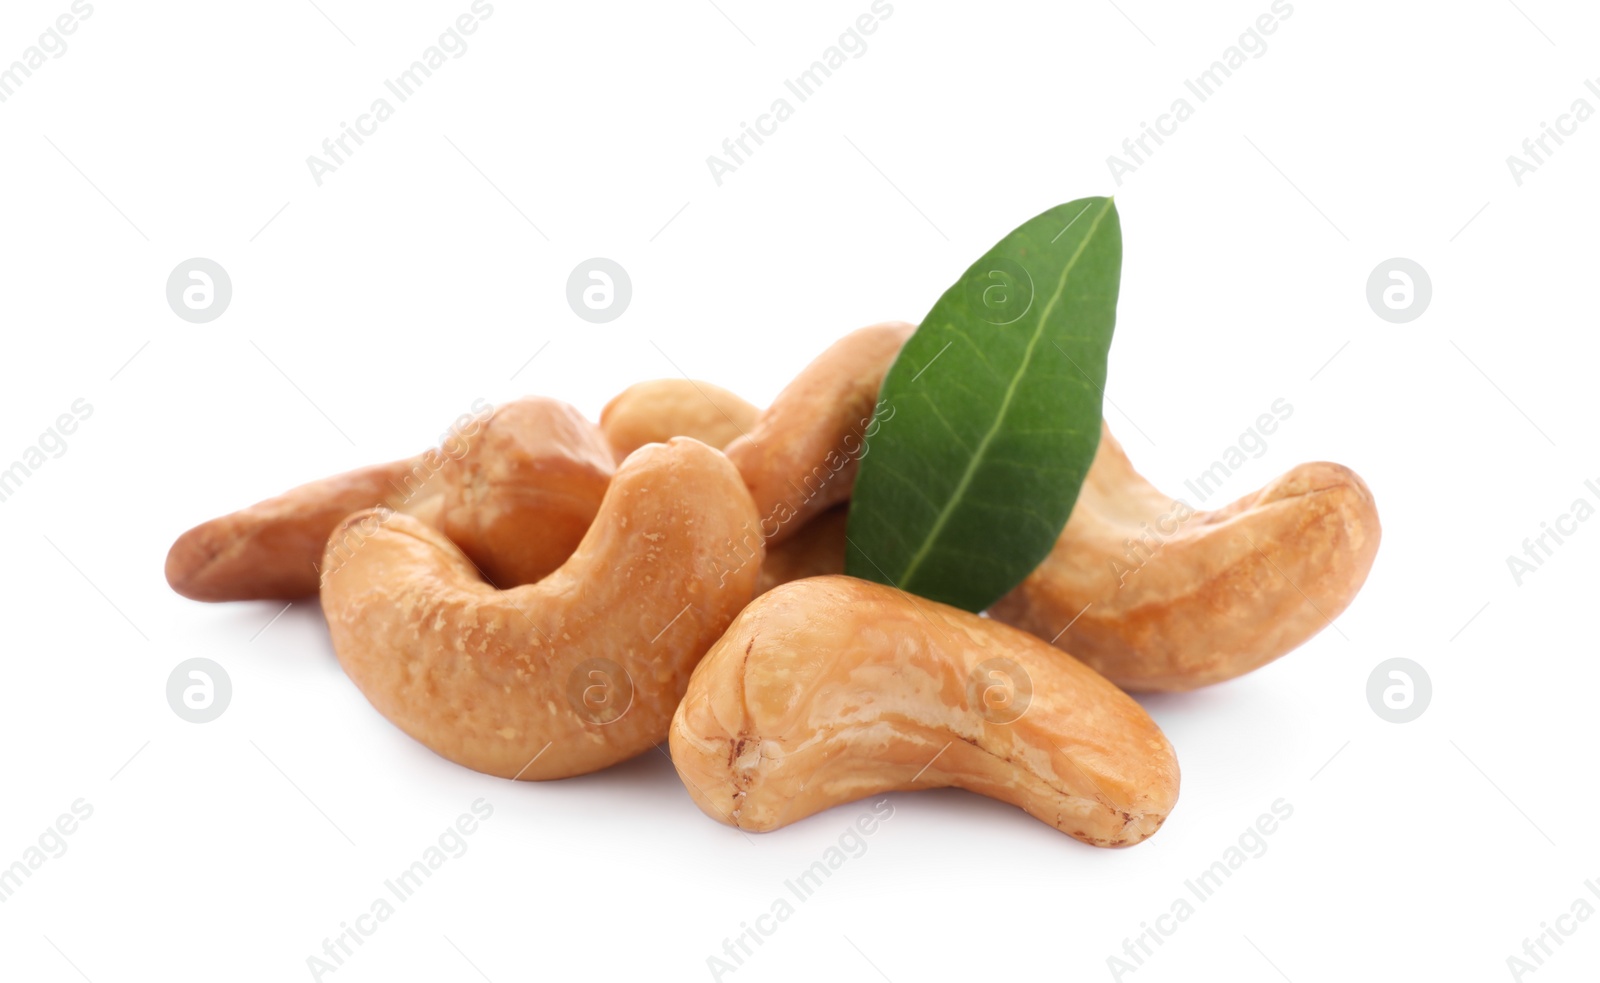 Photo of Pile of tasty organic cashew nuts and green leaf isolated on white